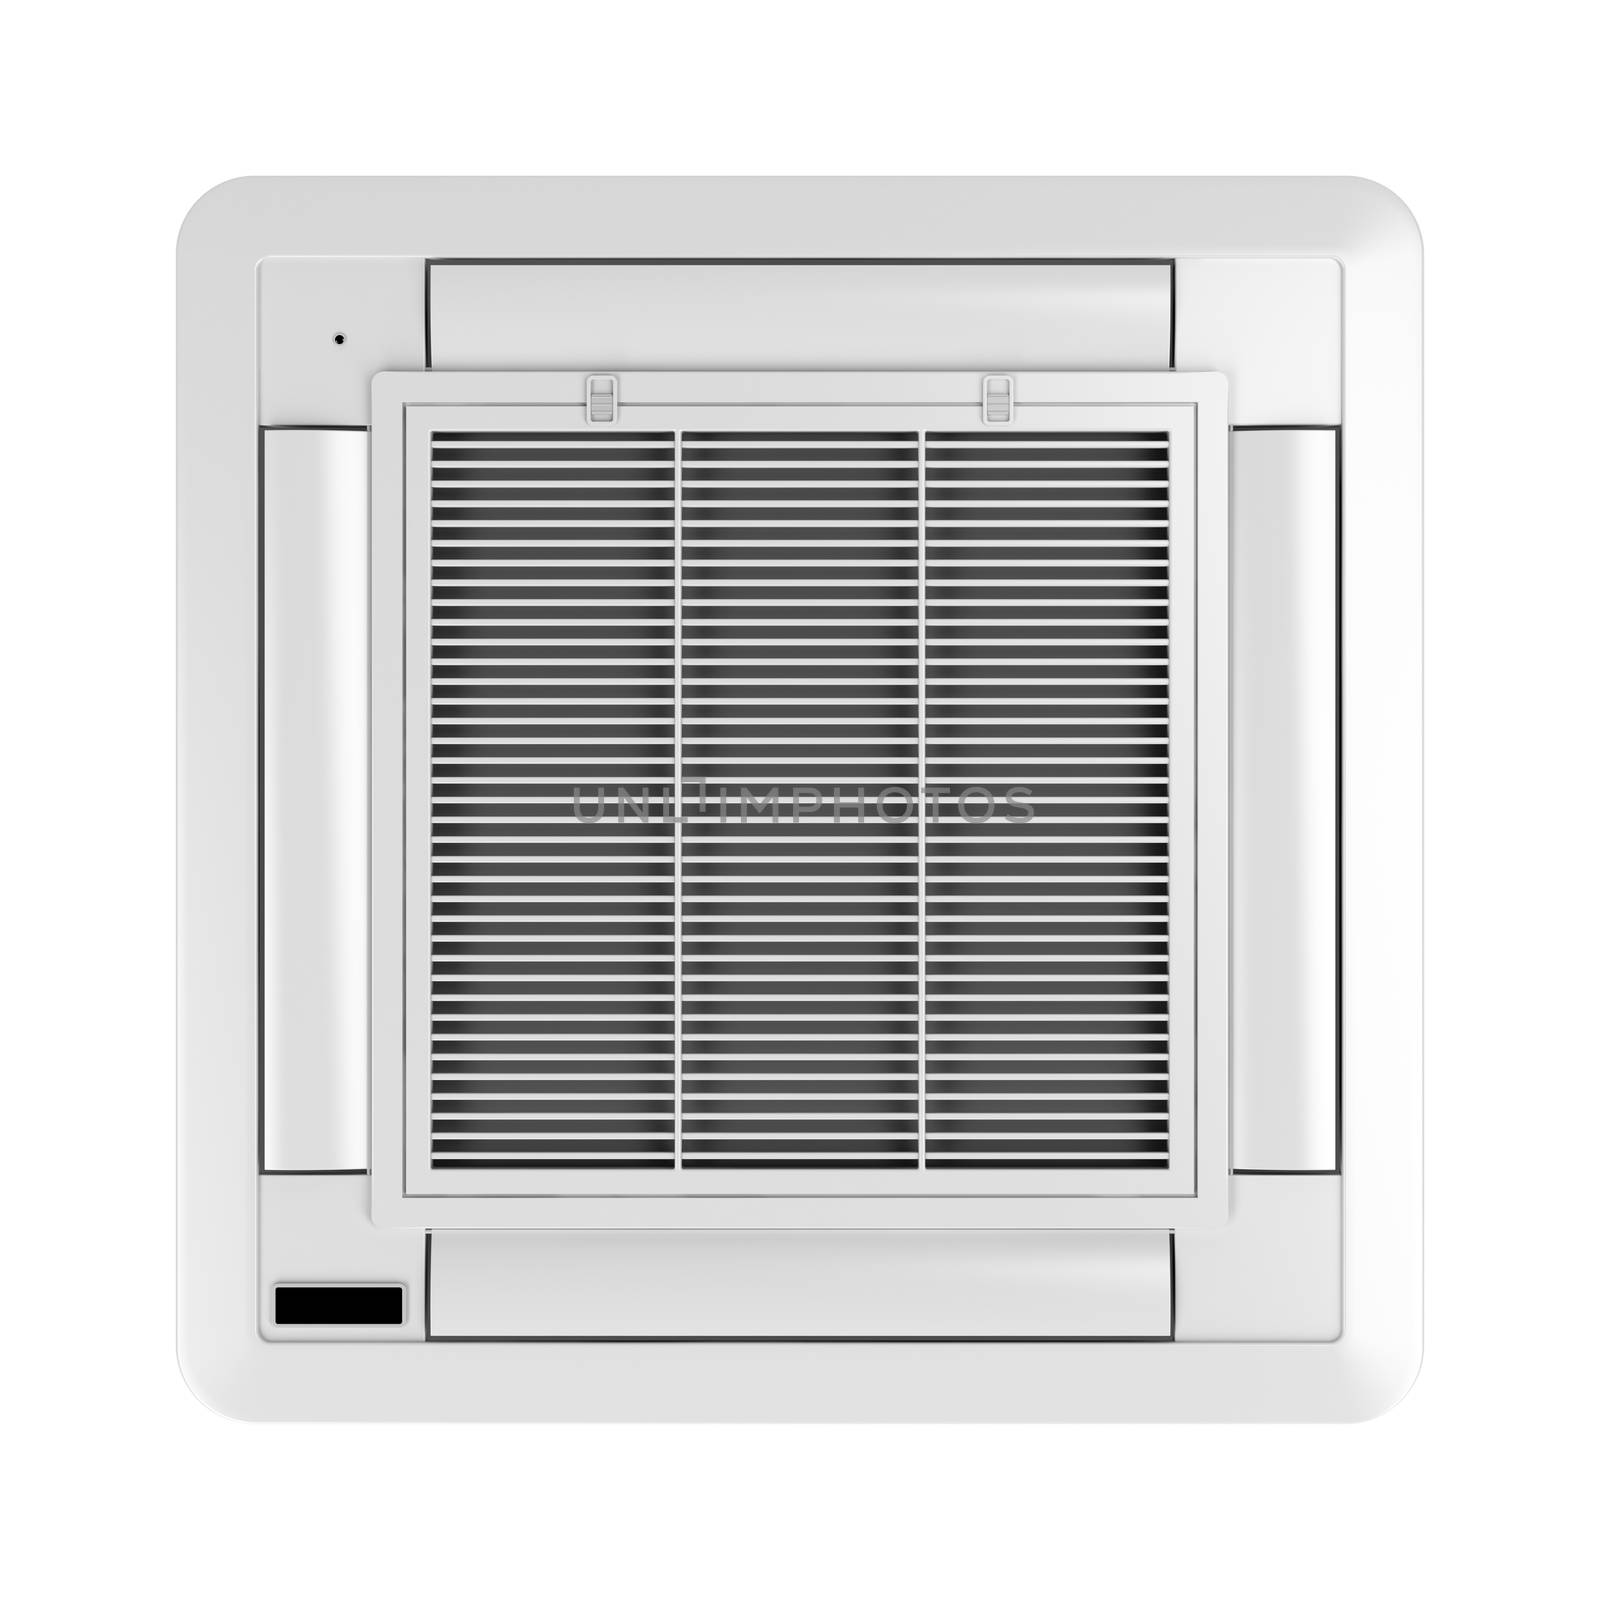 Ceiling mounted air conditioner by magraphics